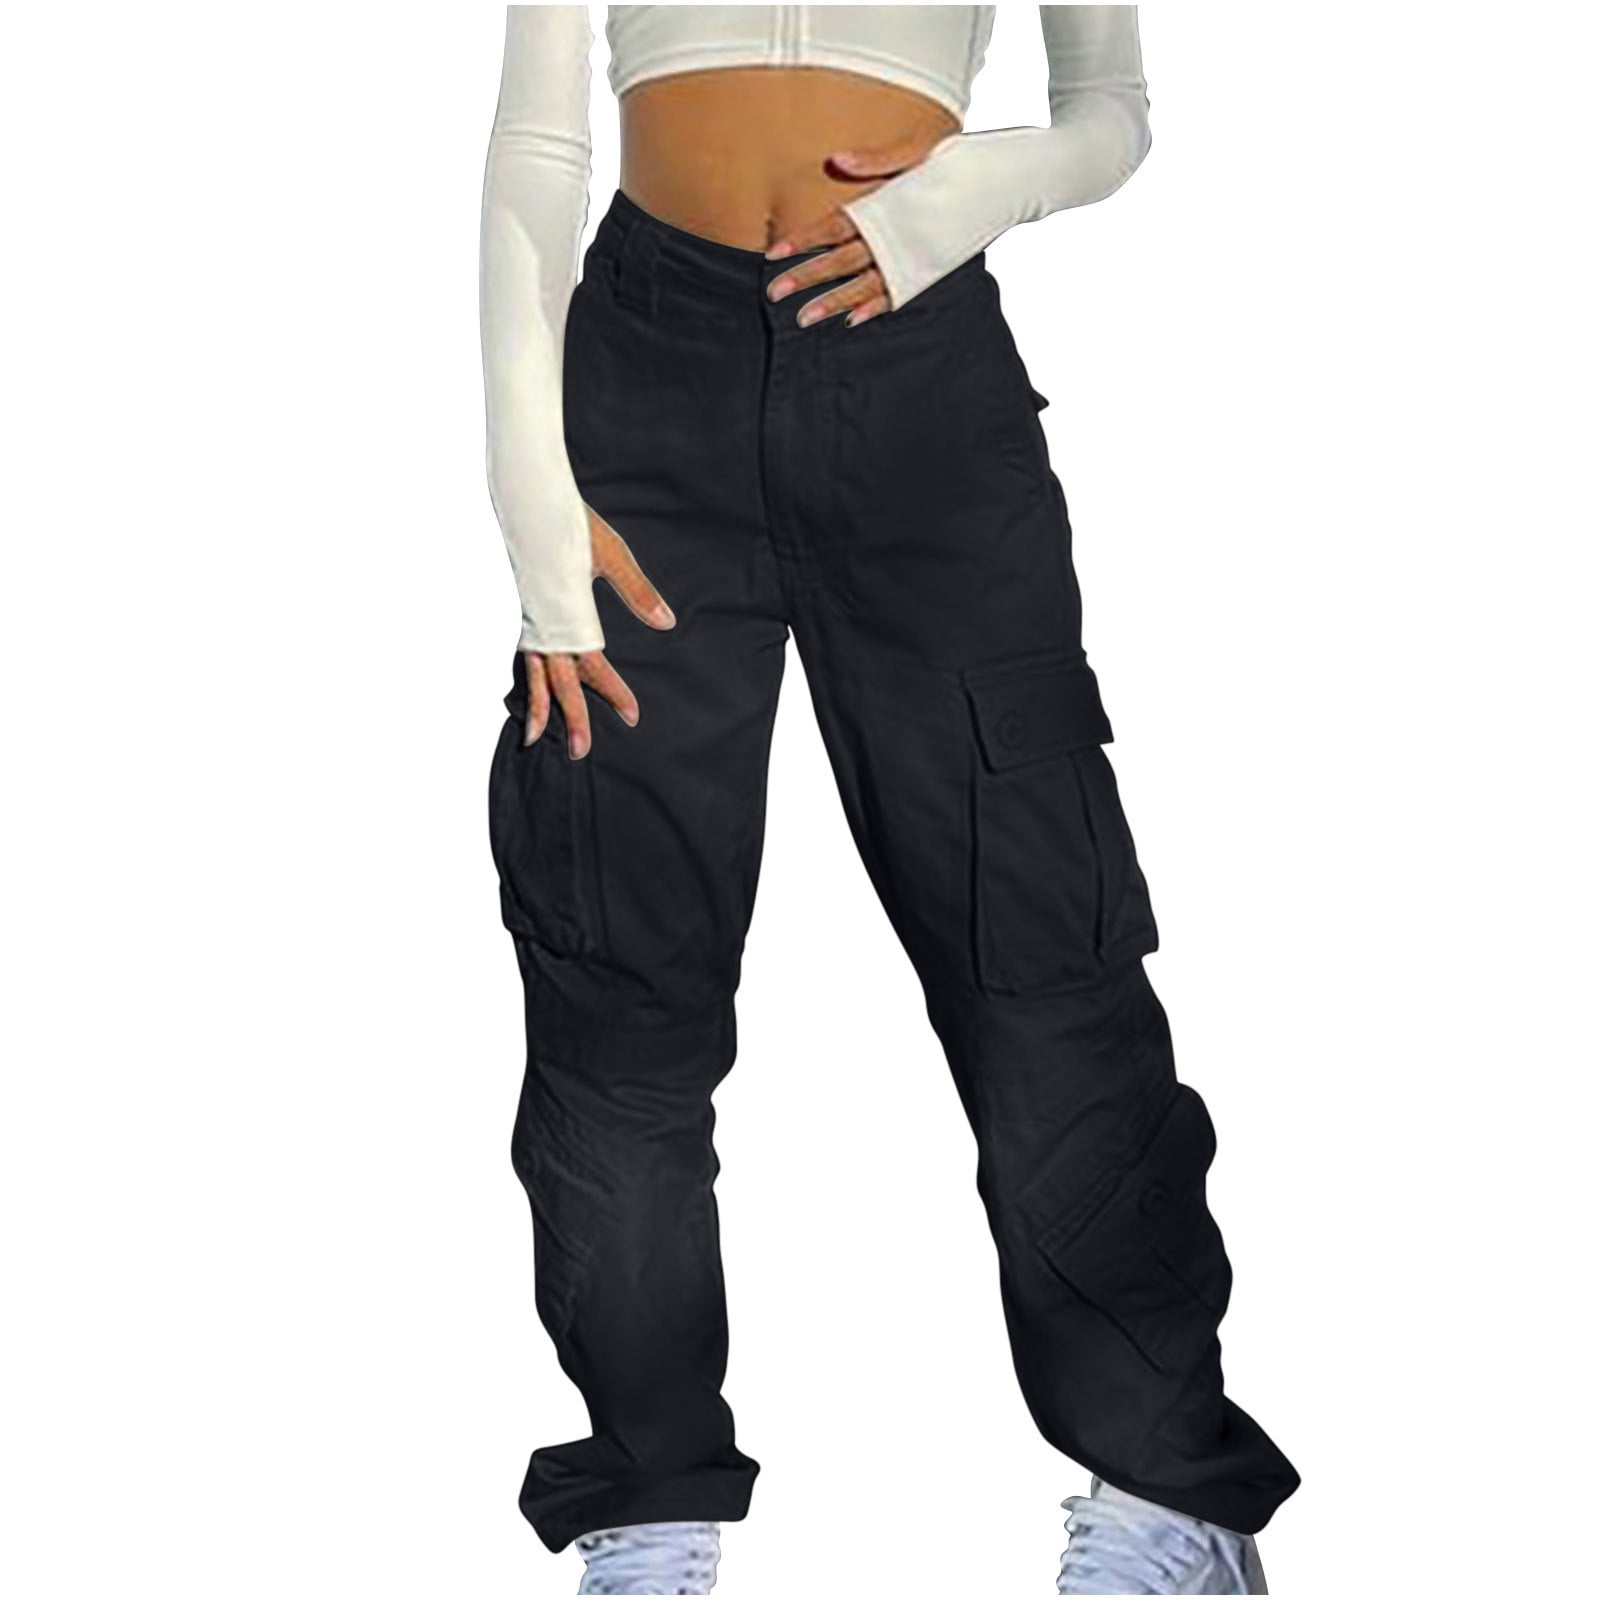 Women Vintage Cargo Pants Low Rise Baggy Casual Street Trousers